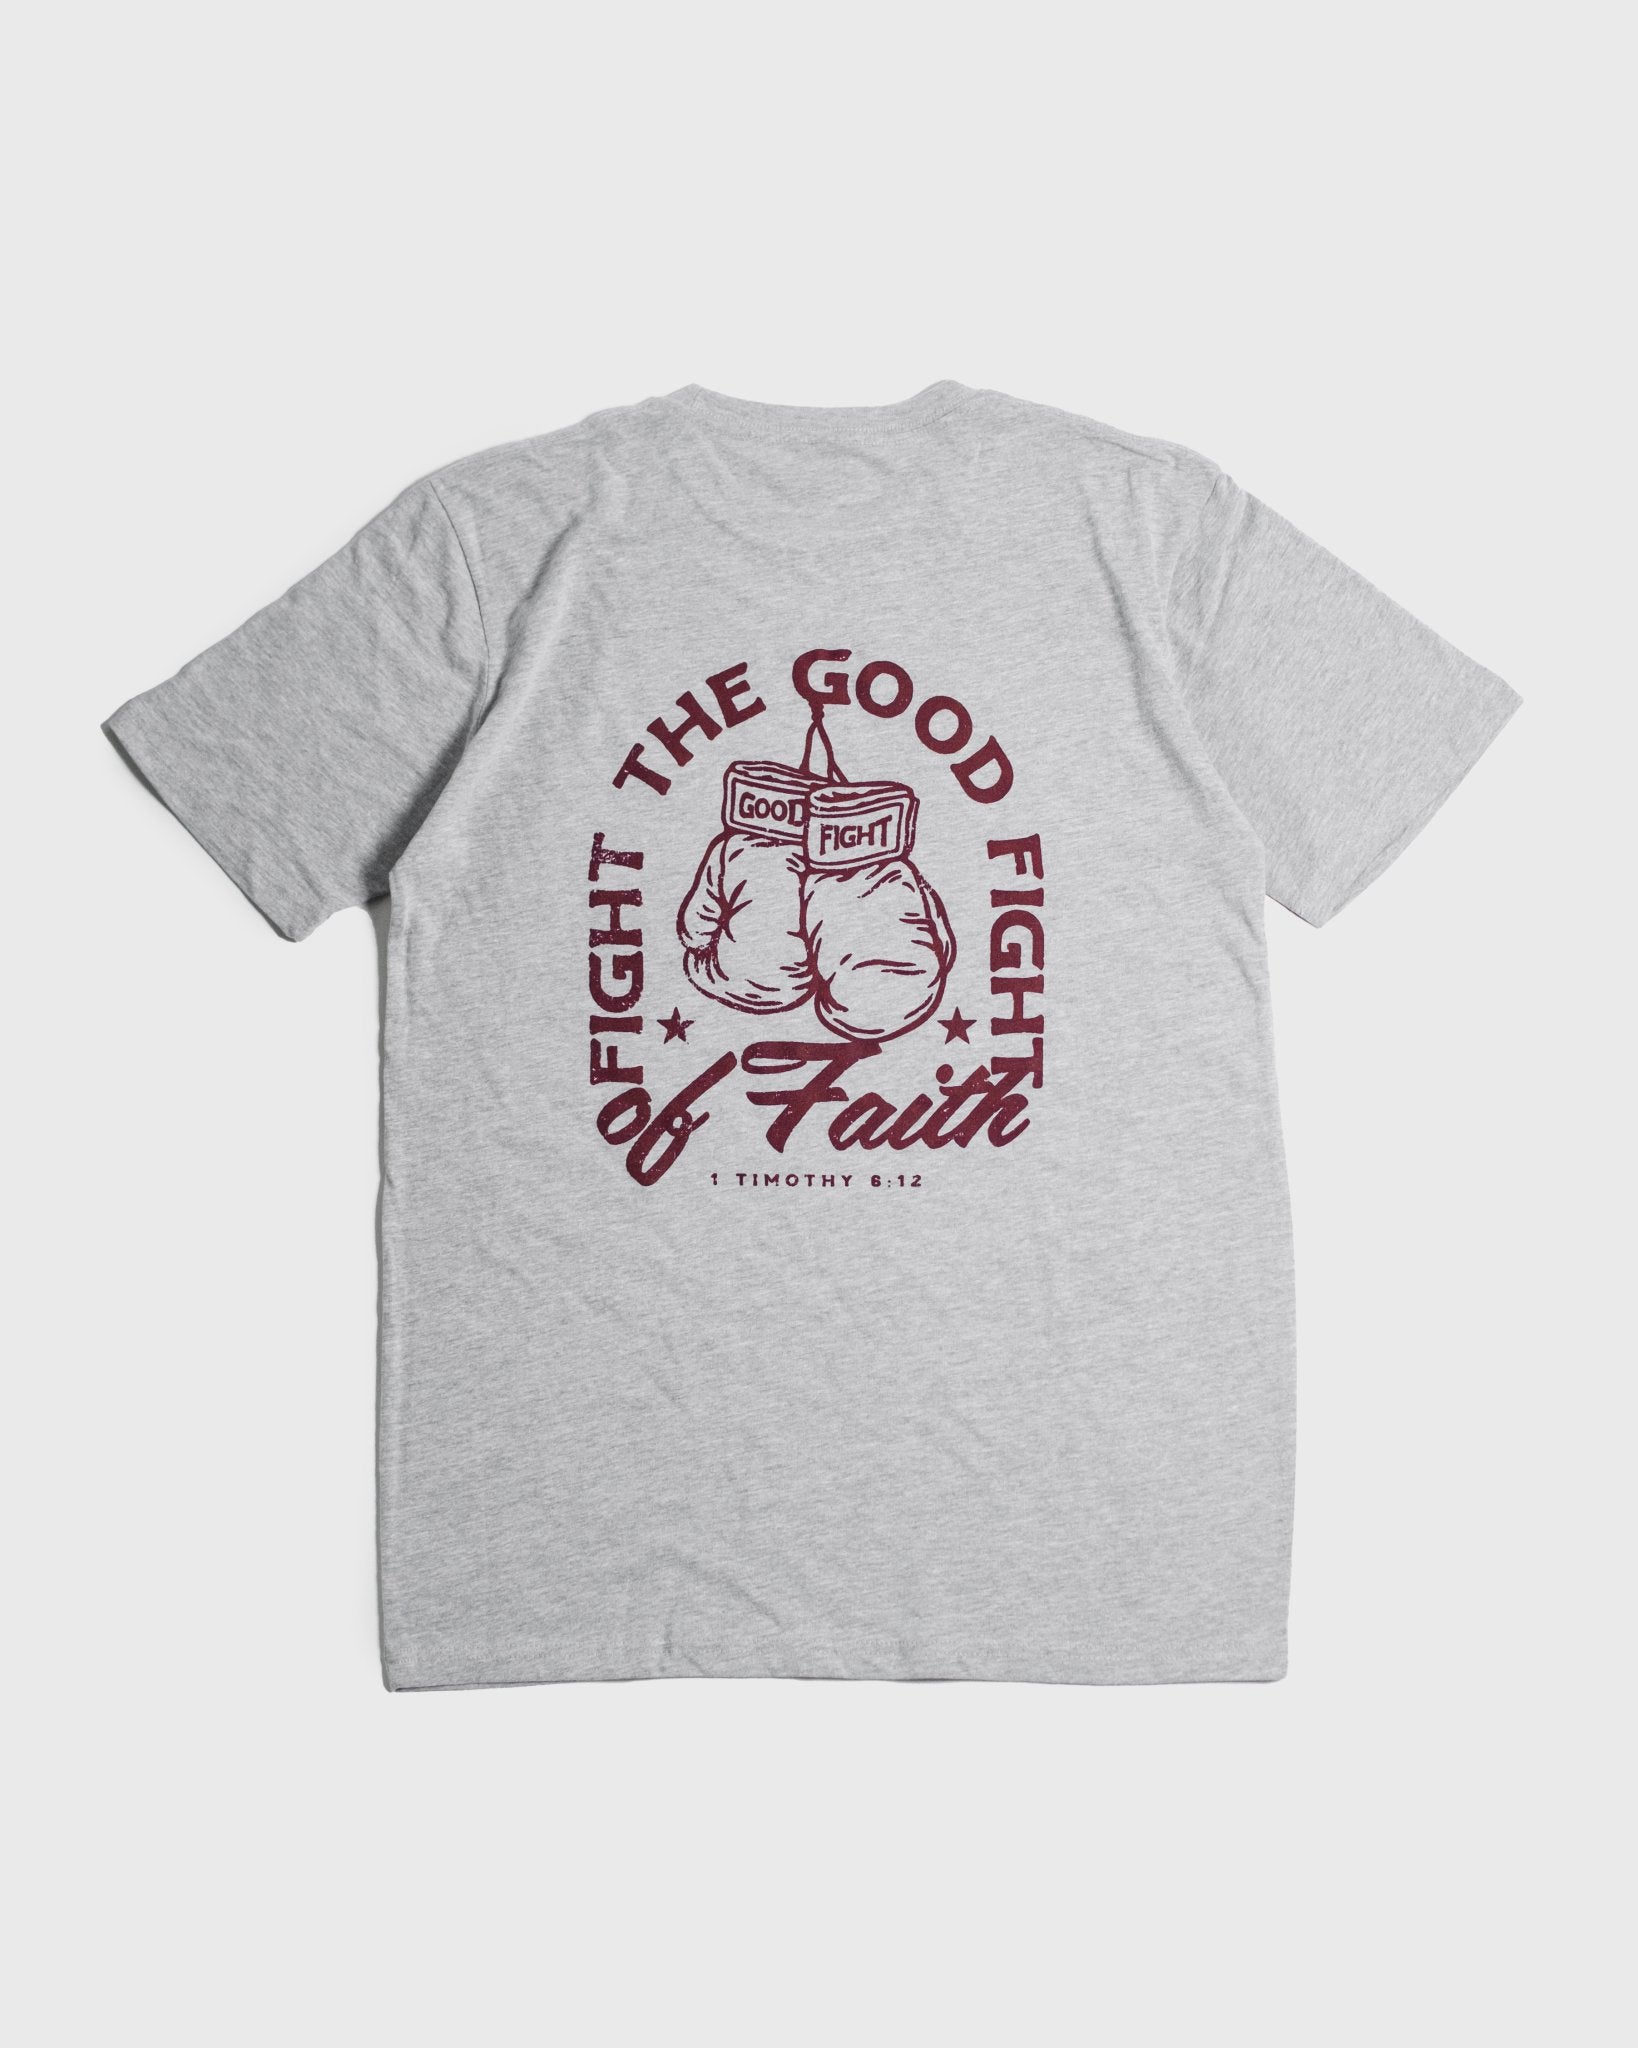 "Good Fight" Athletic Grey Staple Tee (Limited Edition) - Proclamation Coalition